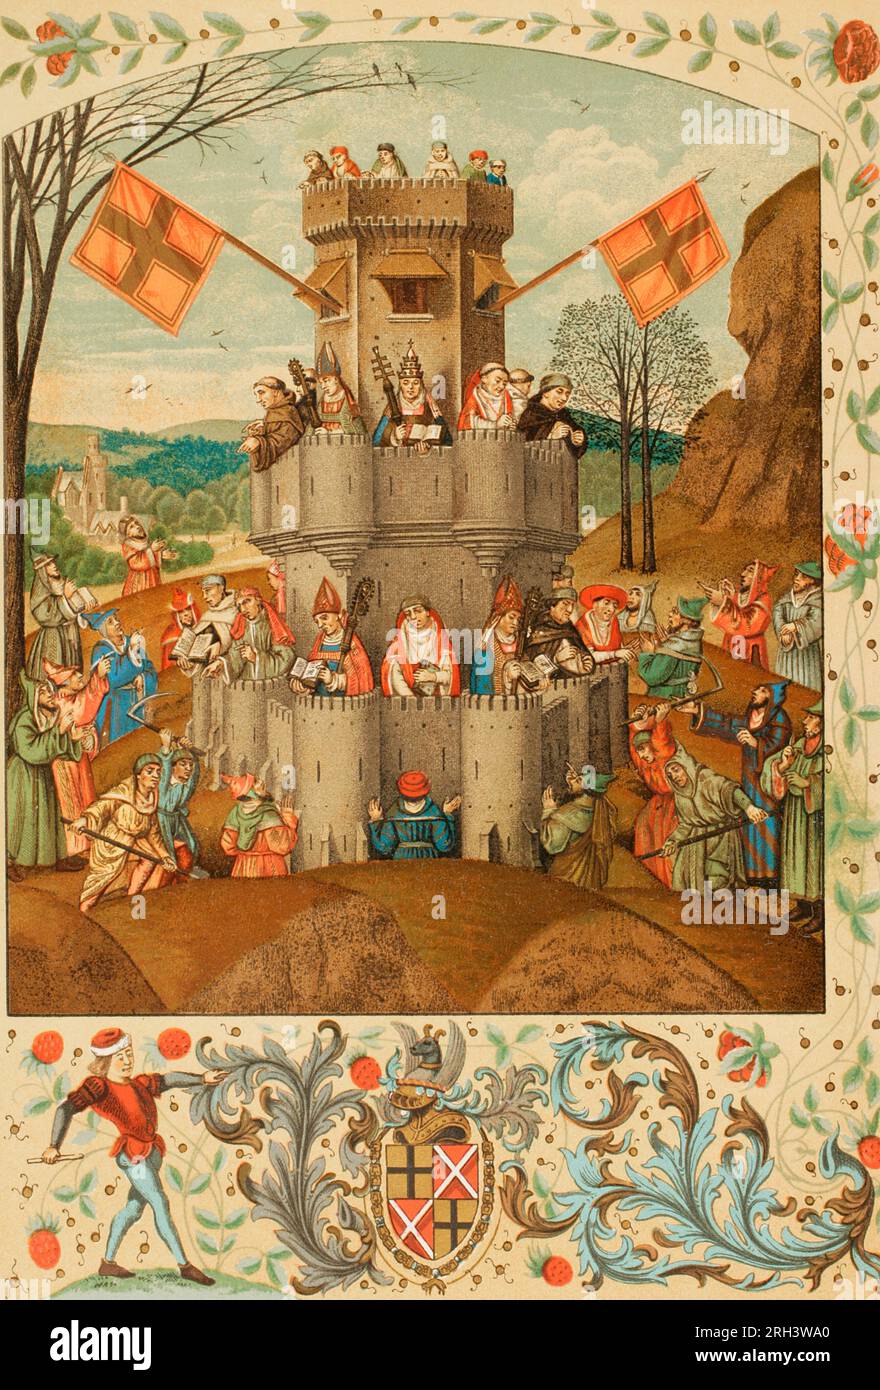 Representation of the Catholic Church as The Fortress of Faith. The defending forces of the Christian faith. Besieged by the impious and heretics, it is defended by the Pope, the bishops, the monks, and the Doctors of the Church, who are the knights of the faith. Below, coat of arms of Louis de Bruges (Louis de Gruuthuse), Flemish courtier and nobleman (ca. 1427-1492). Chromolithography from a 15th-century miniature. 'Vie Militaire et Religieuse au Moyen age et à l'Epoque de la Renaissance. Paris, 1877. Stock Photo